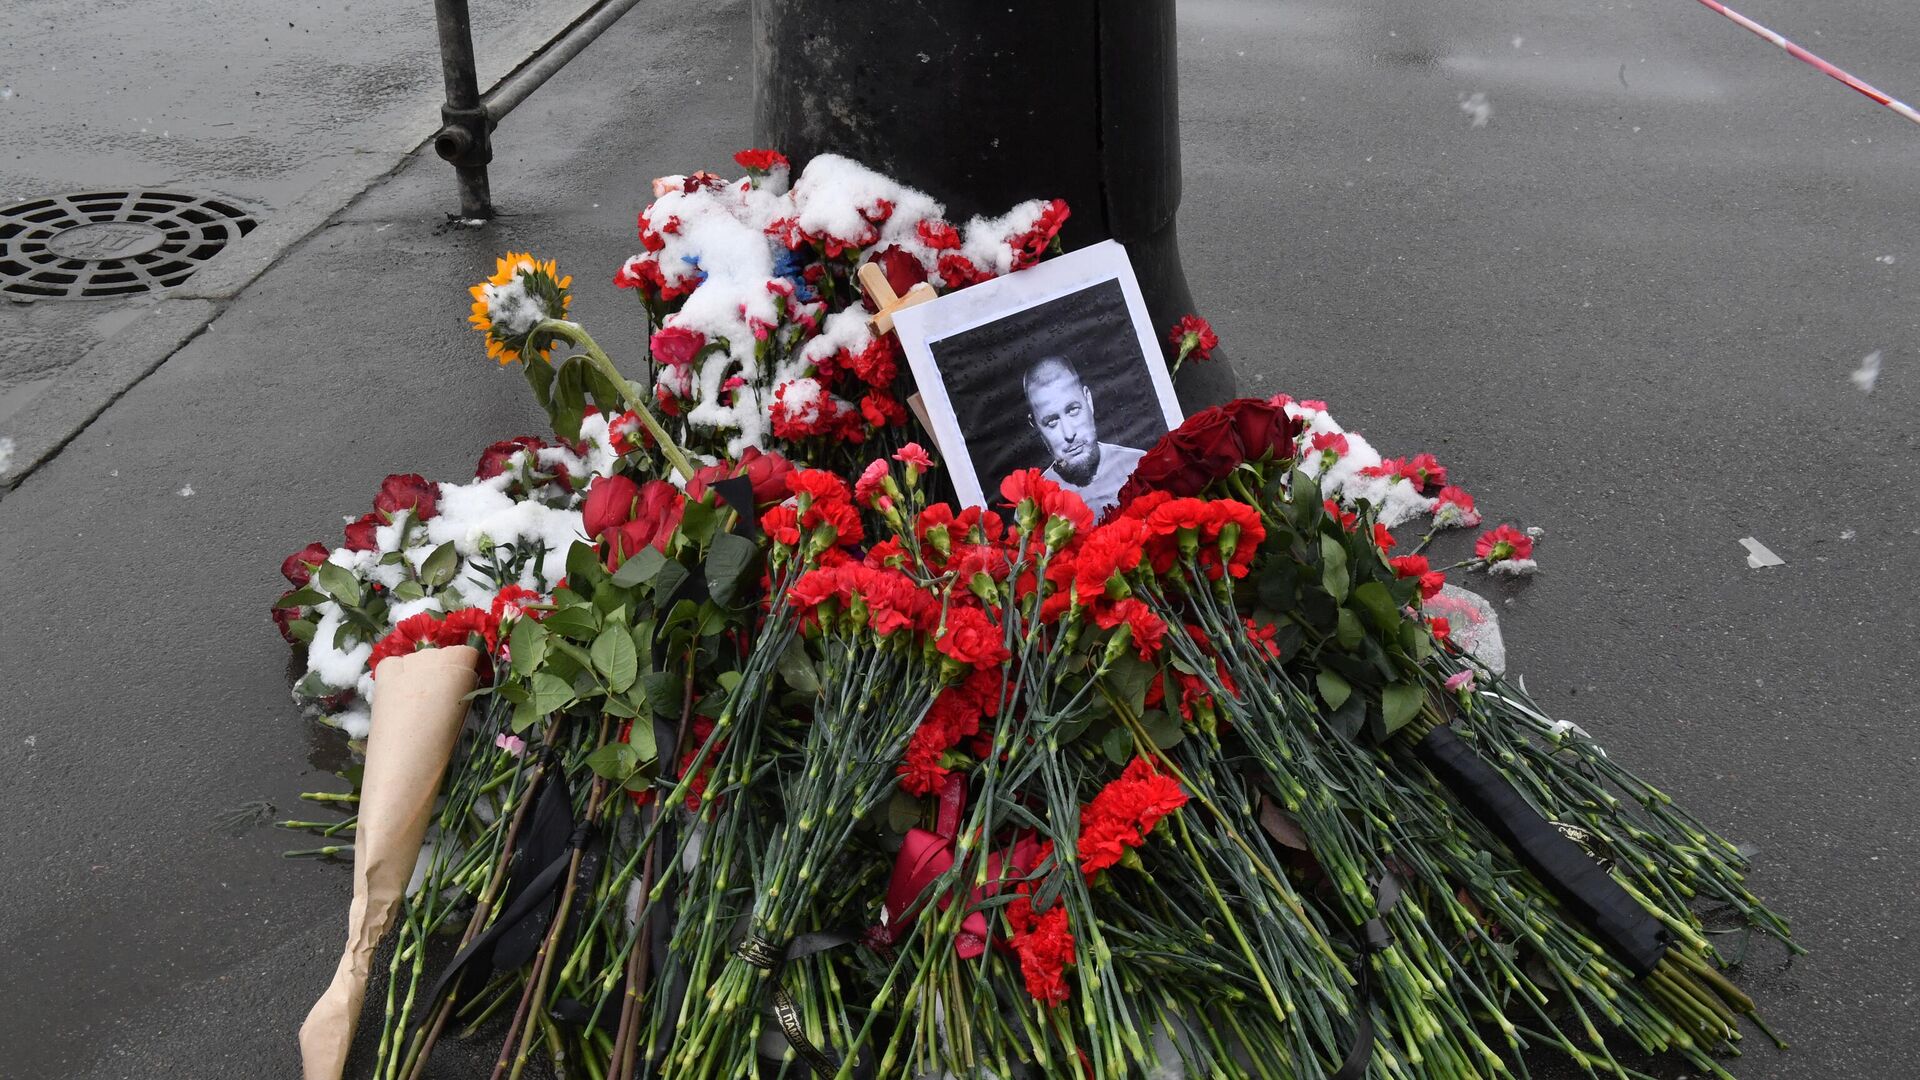 A portrait of Russian military blogger Vladlen Tatarsky, whose real name is Maxim Fomin, who was killed in the April 2 bomb blast in a cafe, is seen among flowers at a makeshift memorial by the explosion site in Saint Petersburg on April 3, 2023.  - Sputnik International, 1920, 03.04.2023